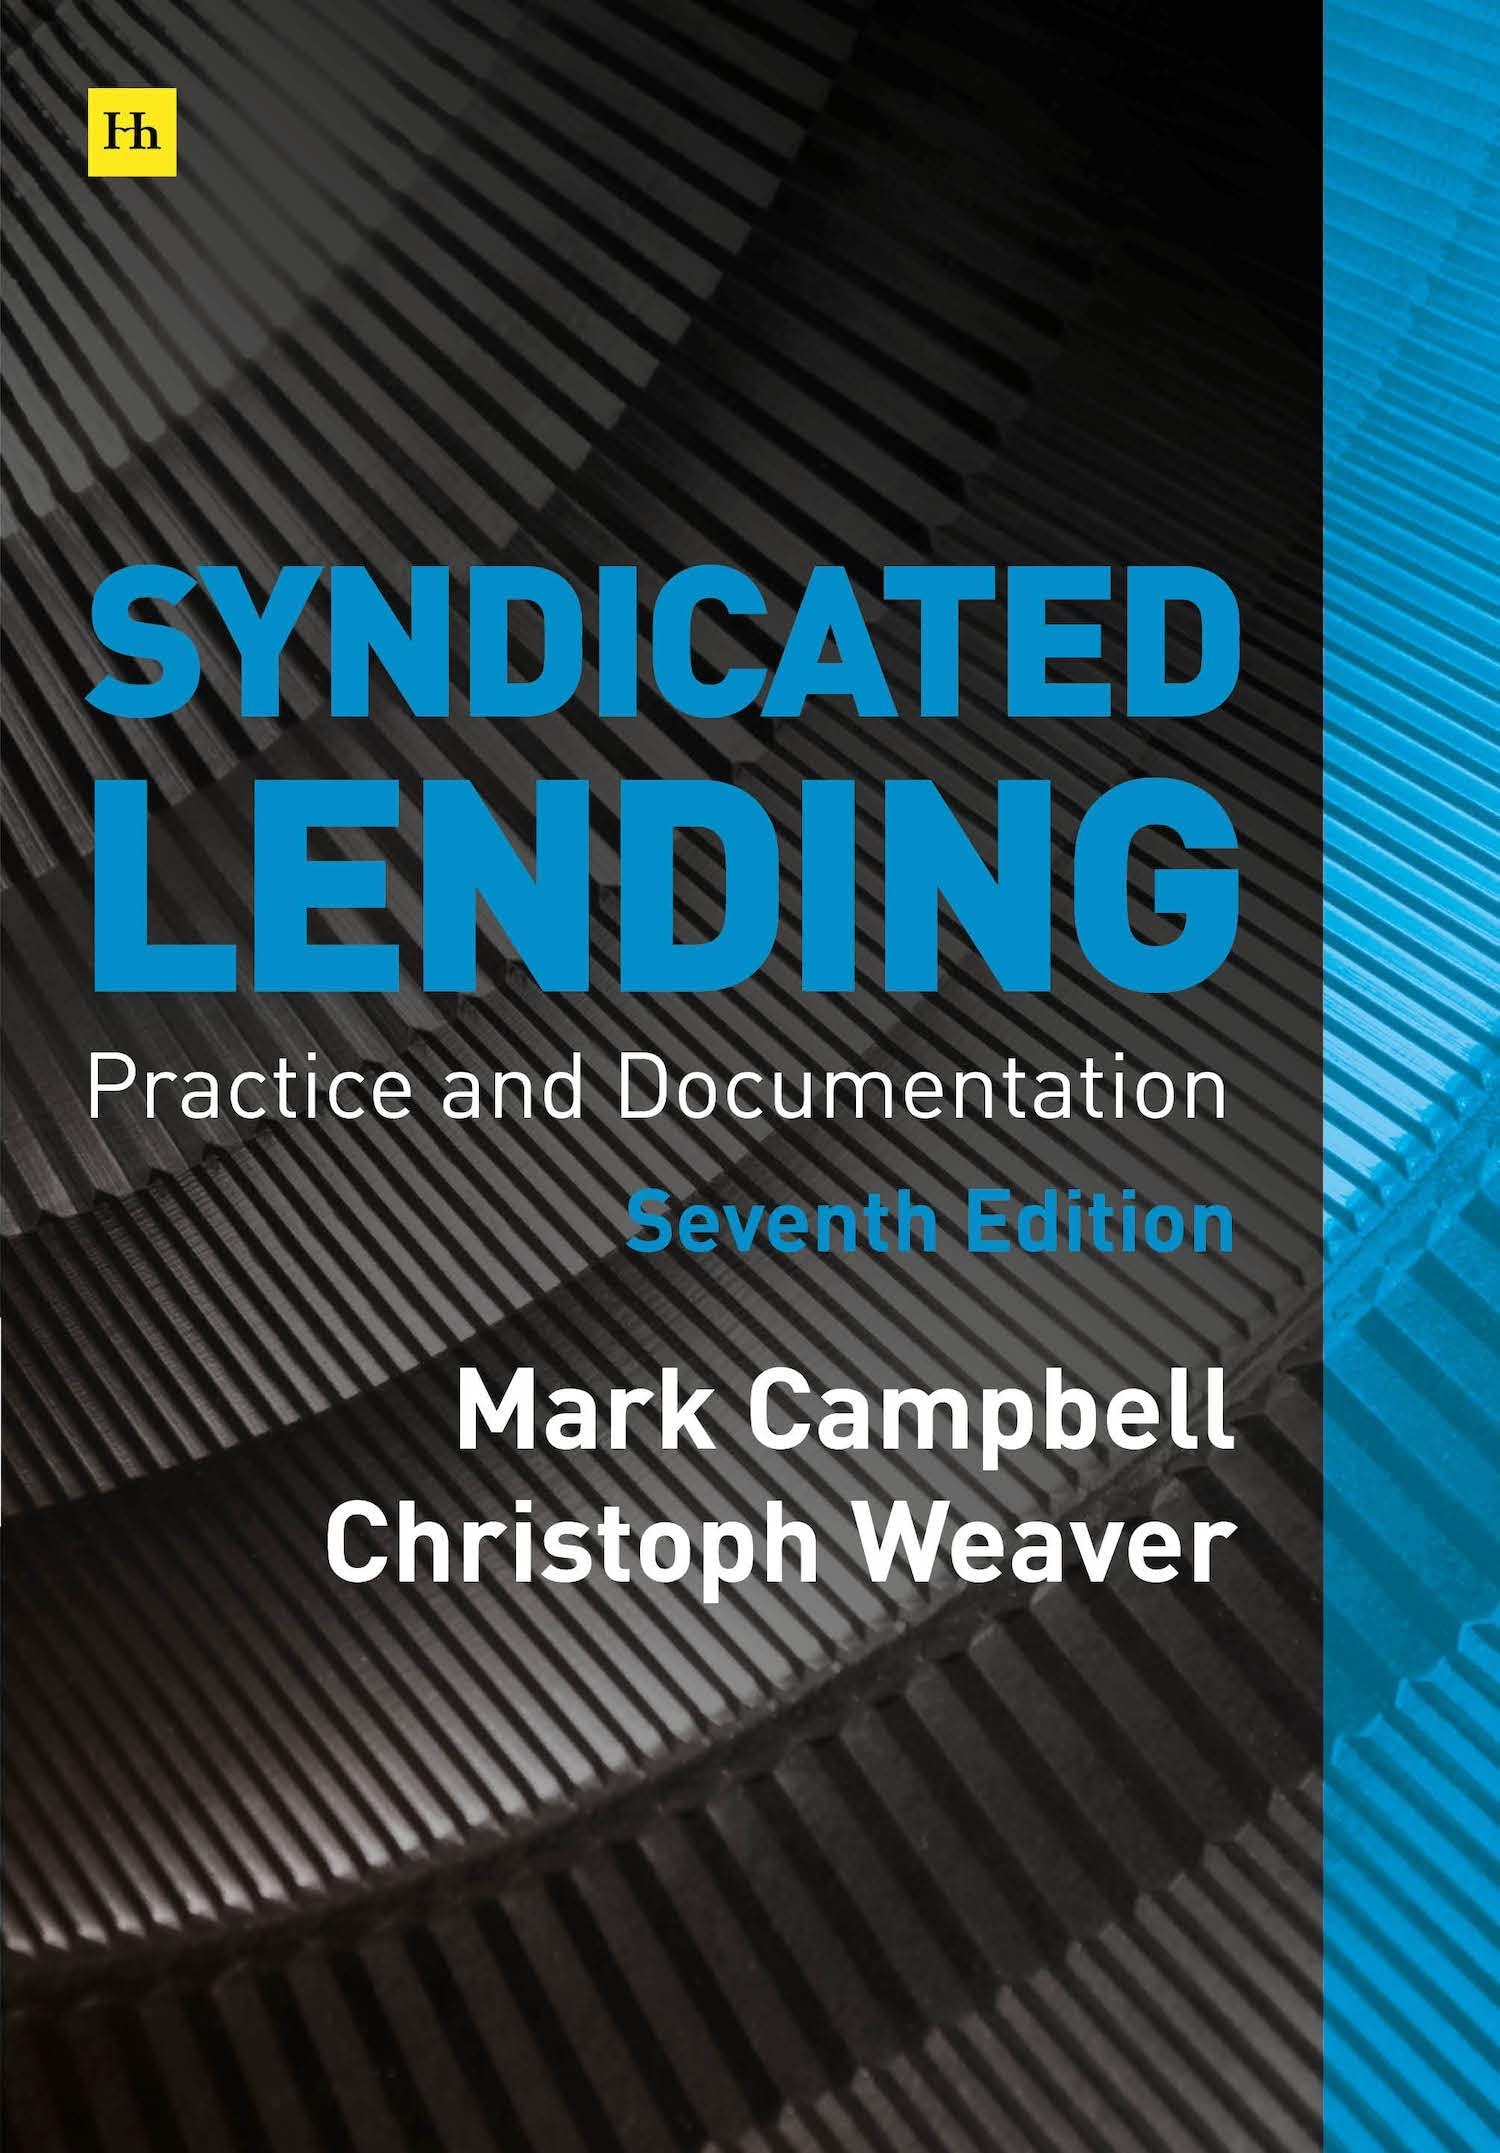 syndicated lending practice and documentation 7th edition mark campbell, christoph weaver 0857196820,